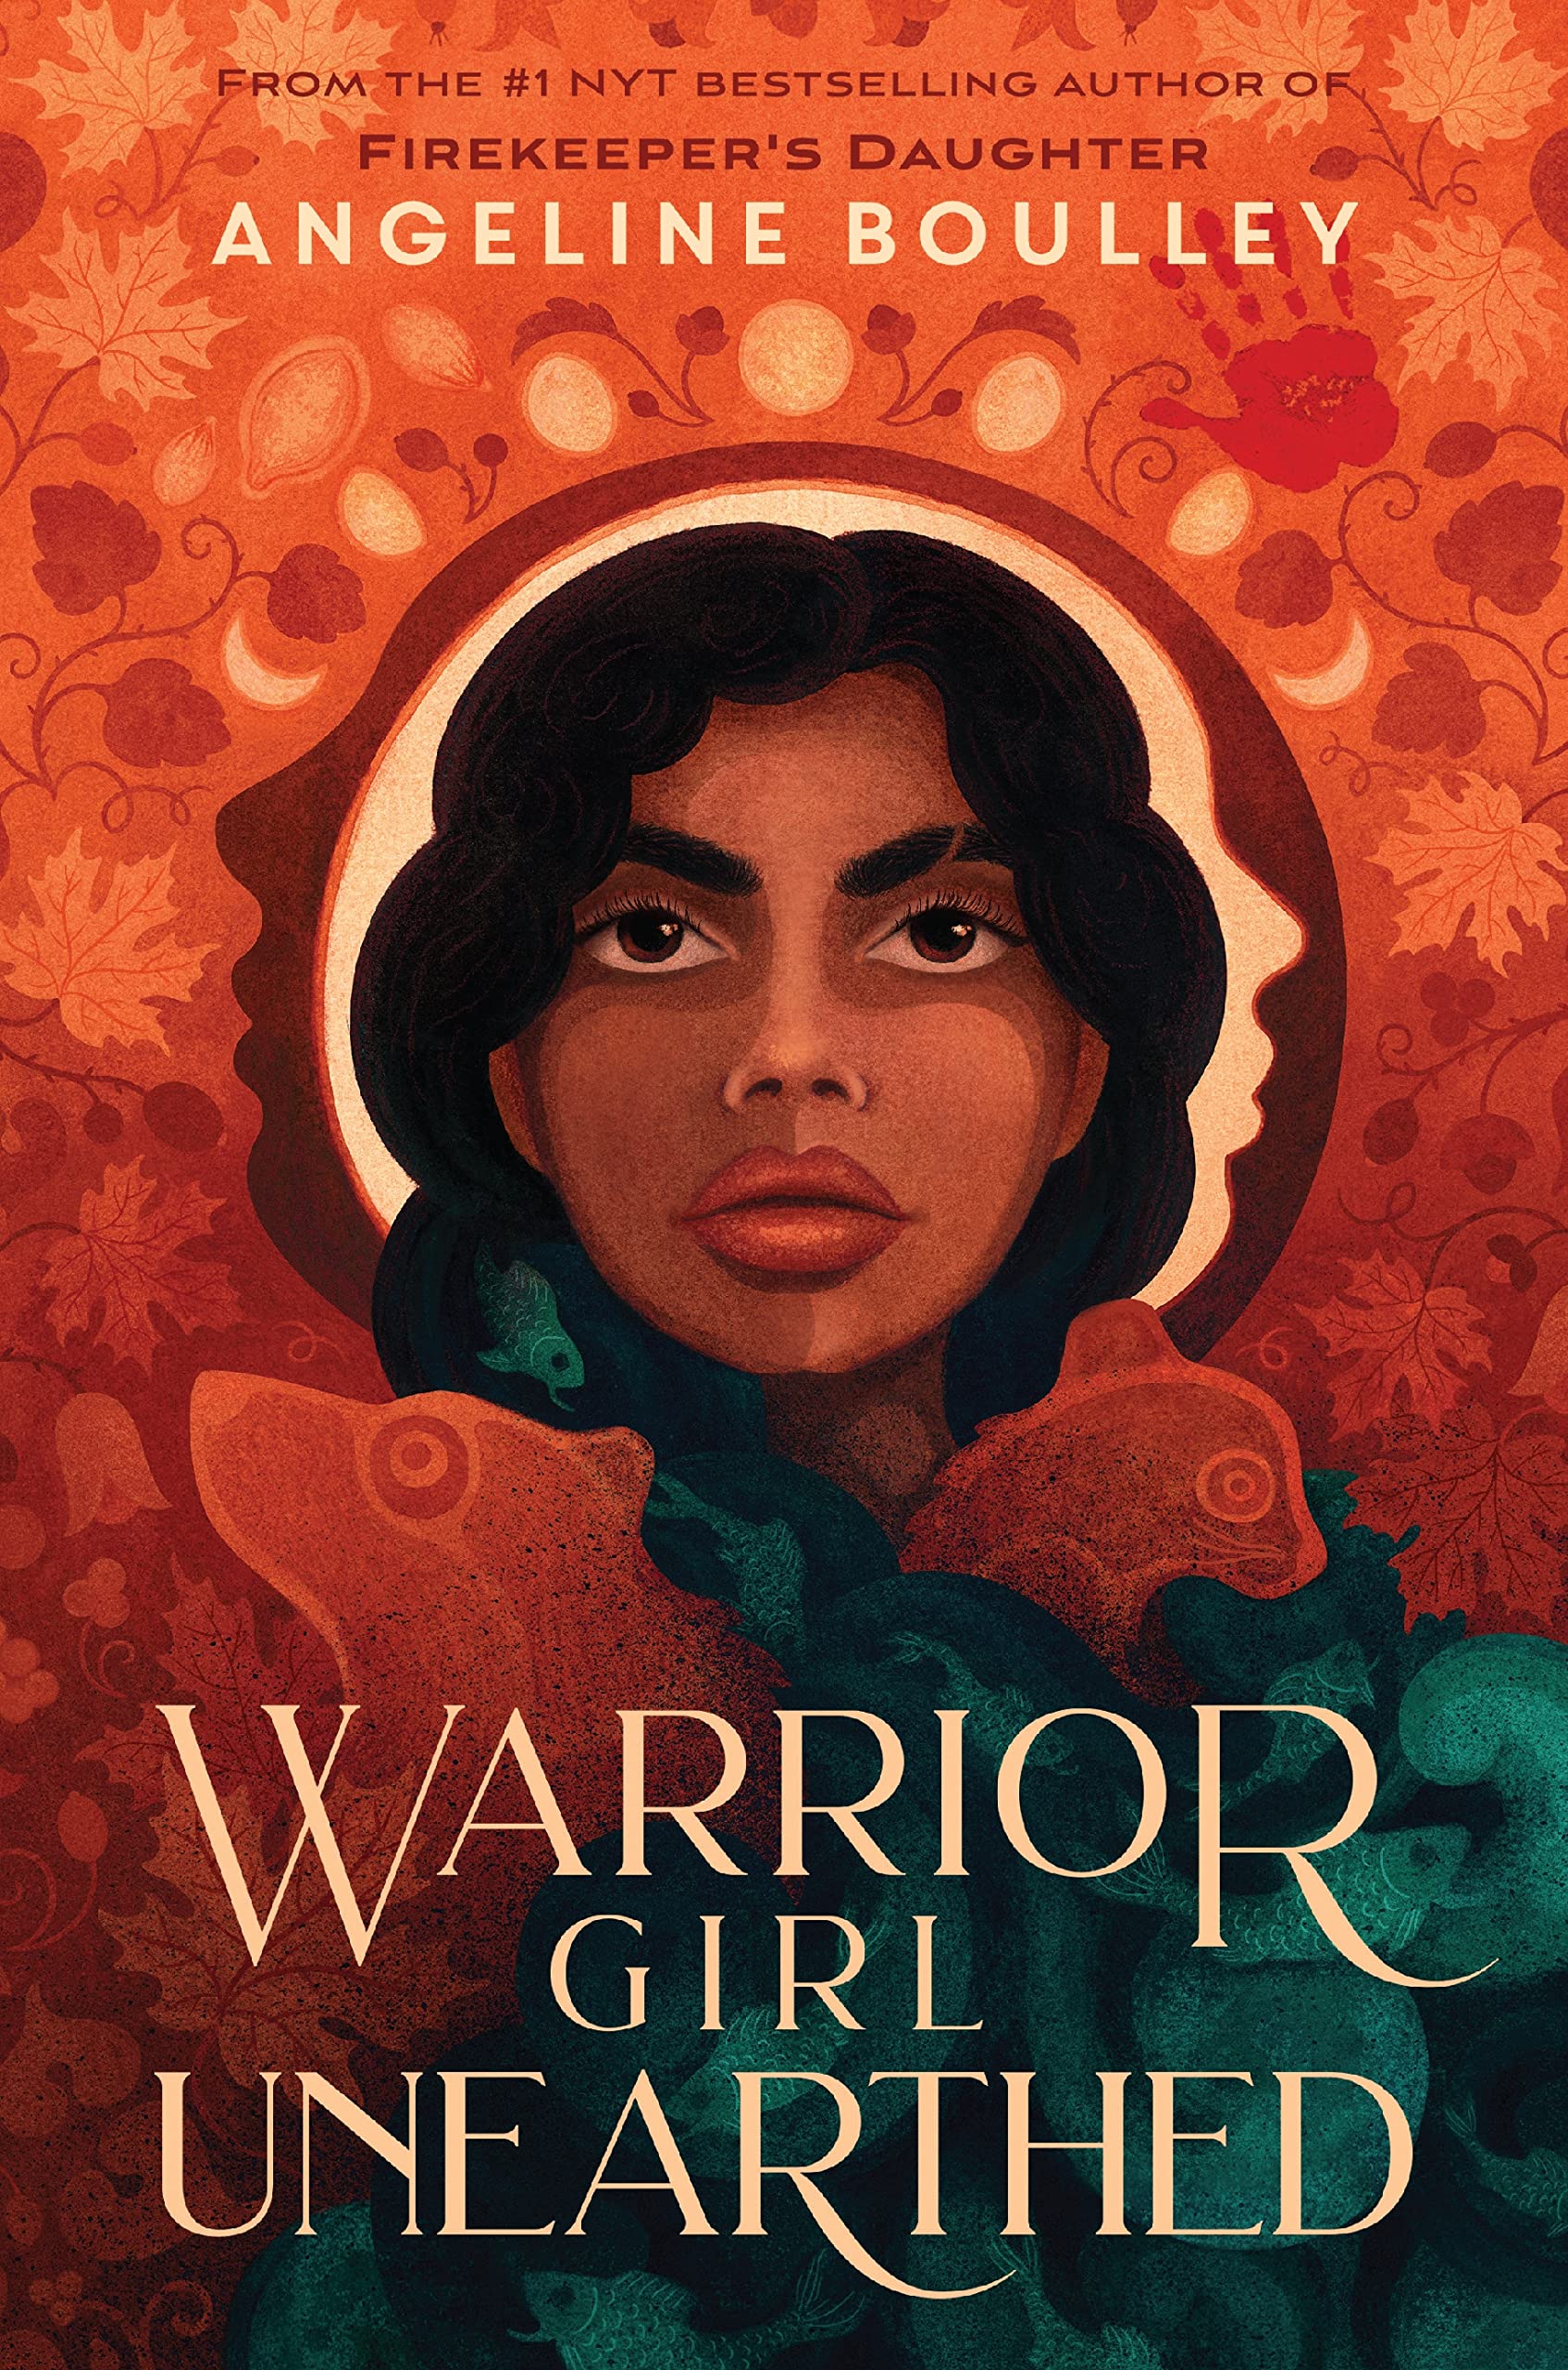 Book cover for Warrior Girl Unearthed